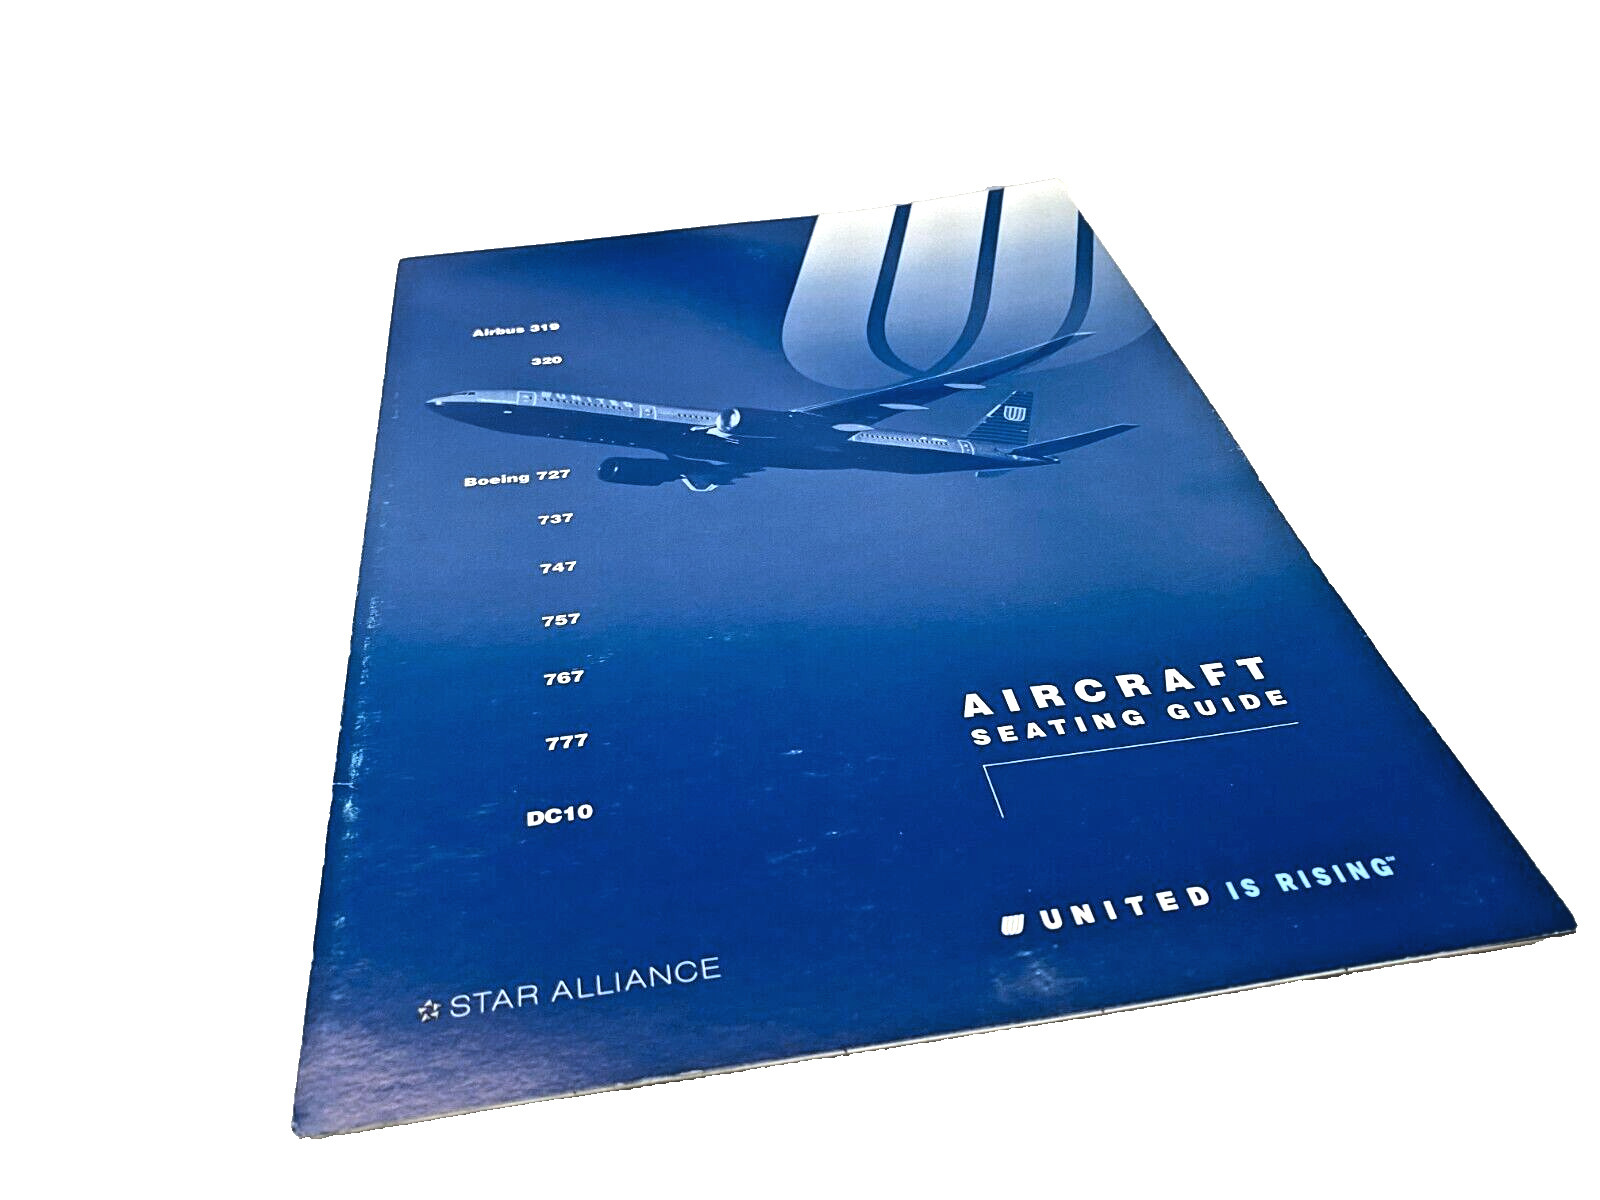 Vintage United Airlines 1998-1999 Aircraft Seating Configuration Guide /Brochure